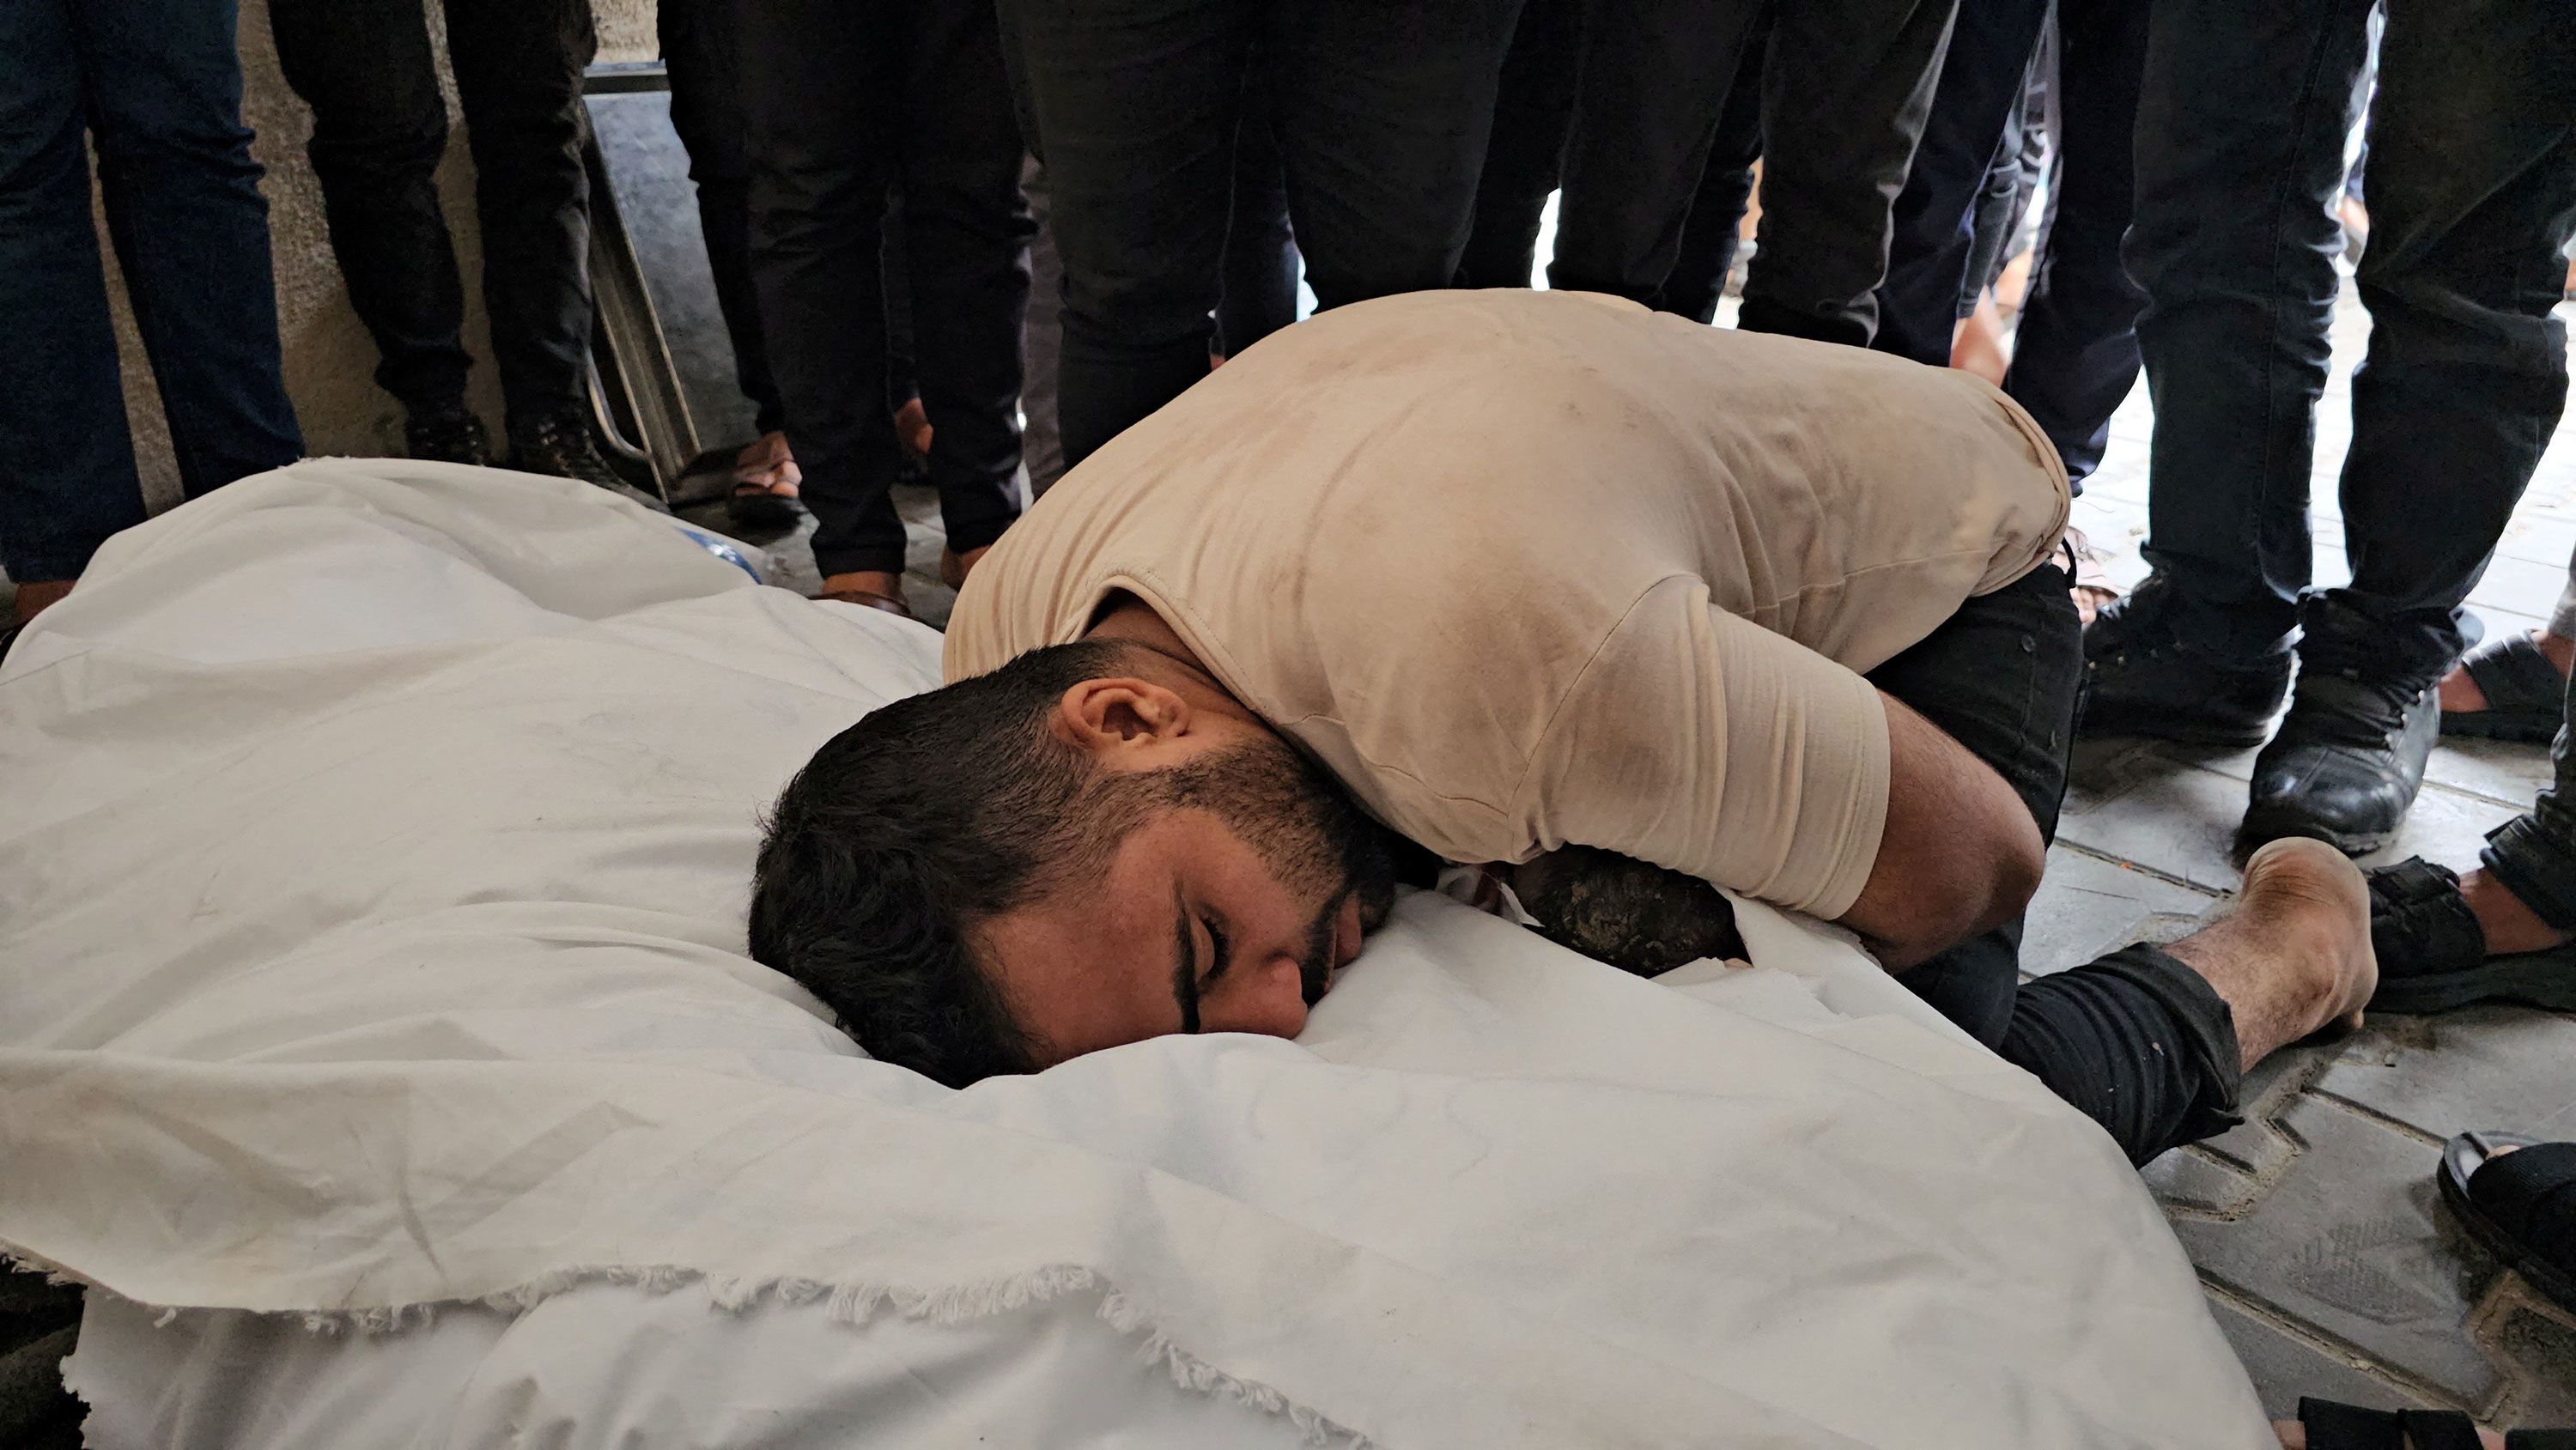 Palestinian lawyer Jehad Al-Kafarnah, whose pregnant wife and unborn child were killed in an Israeli strike, according to health officials, mourns over her shrouded body at a hospital in northern Gaza on Friday, October 27.